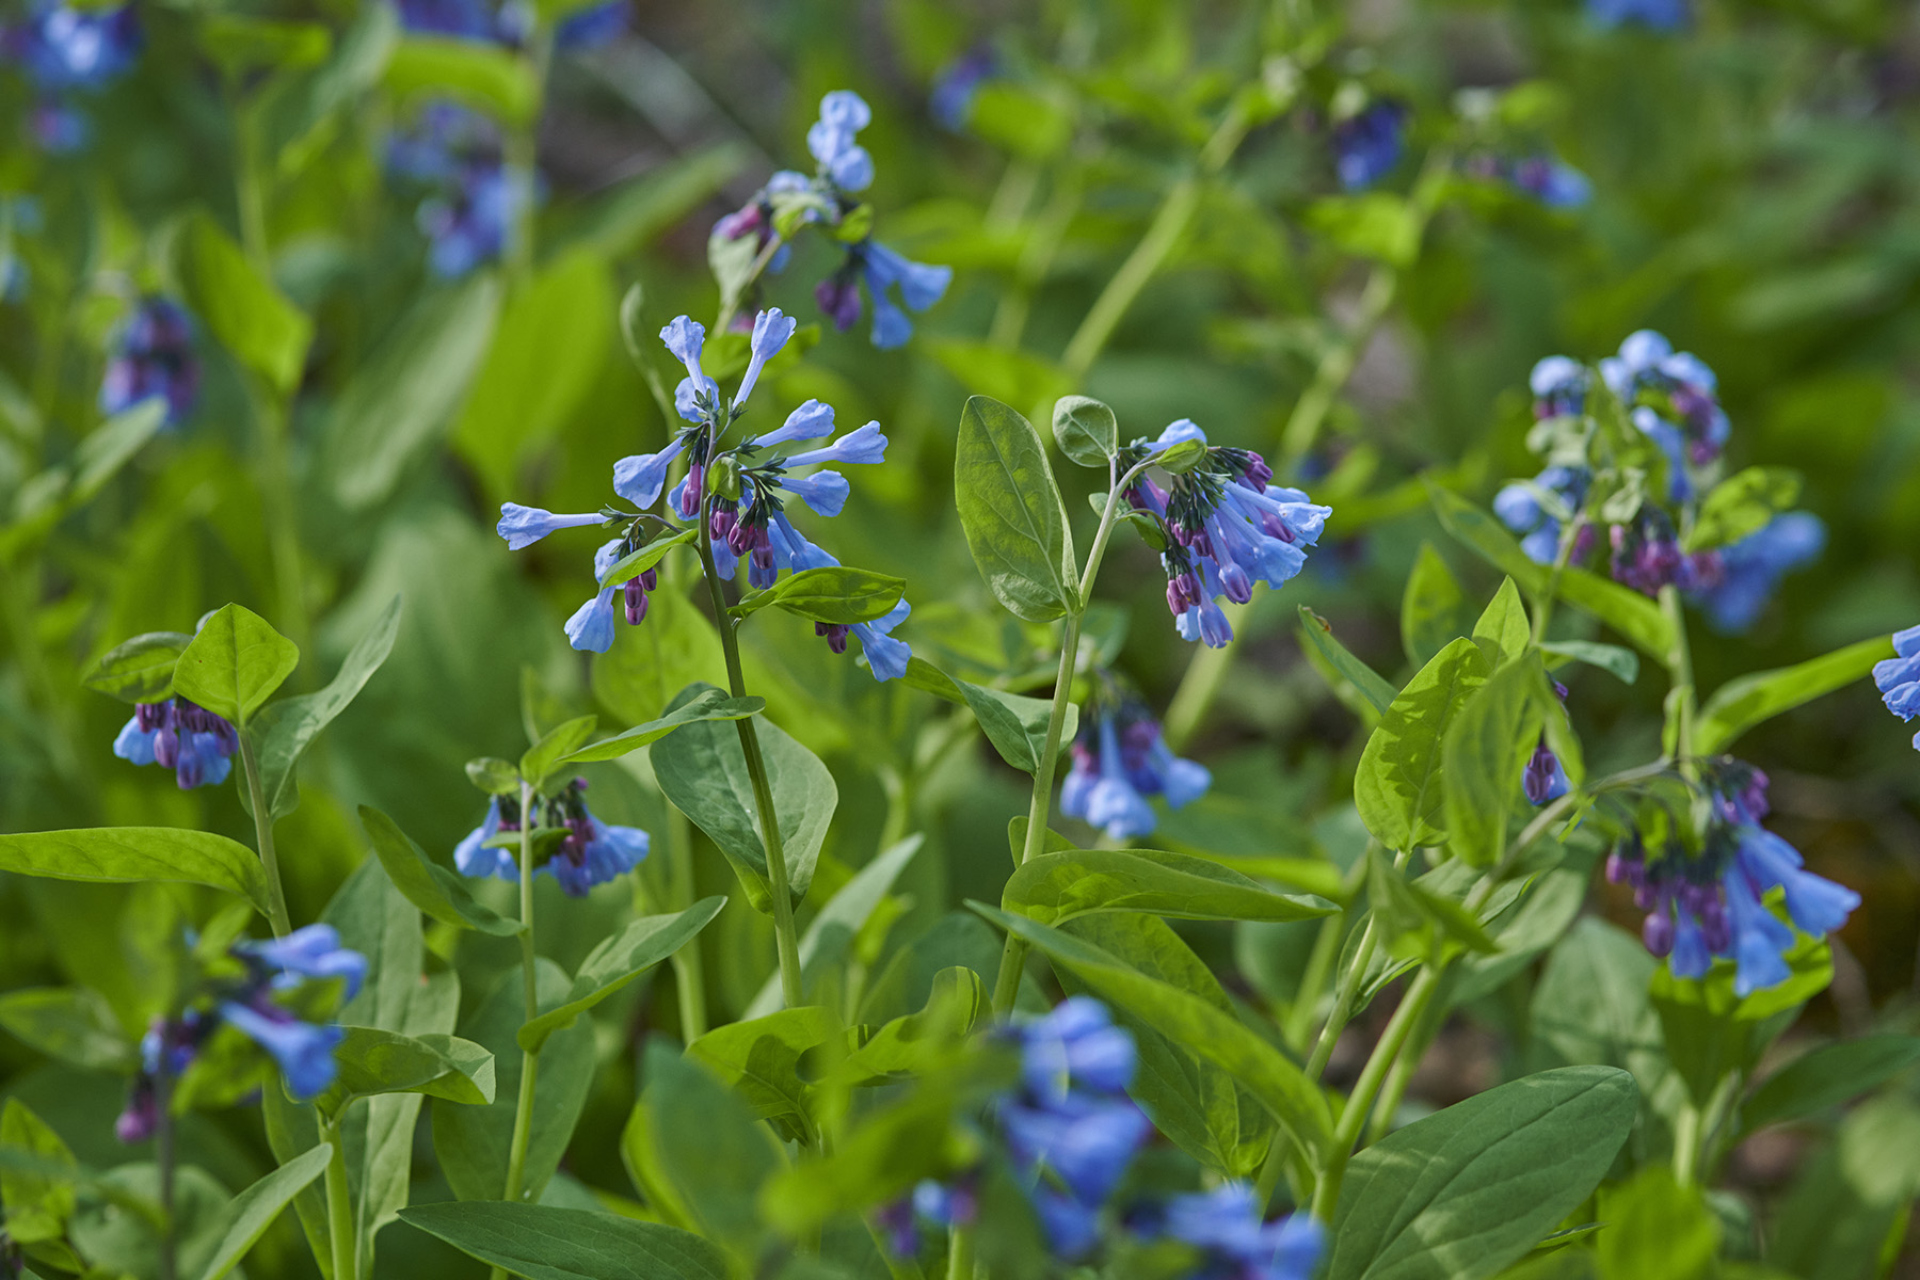 Virginia bluebells blooming in spring. Small blue flowers and purple buds with green stems and leaves.